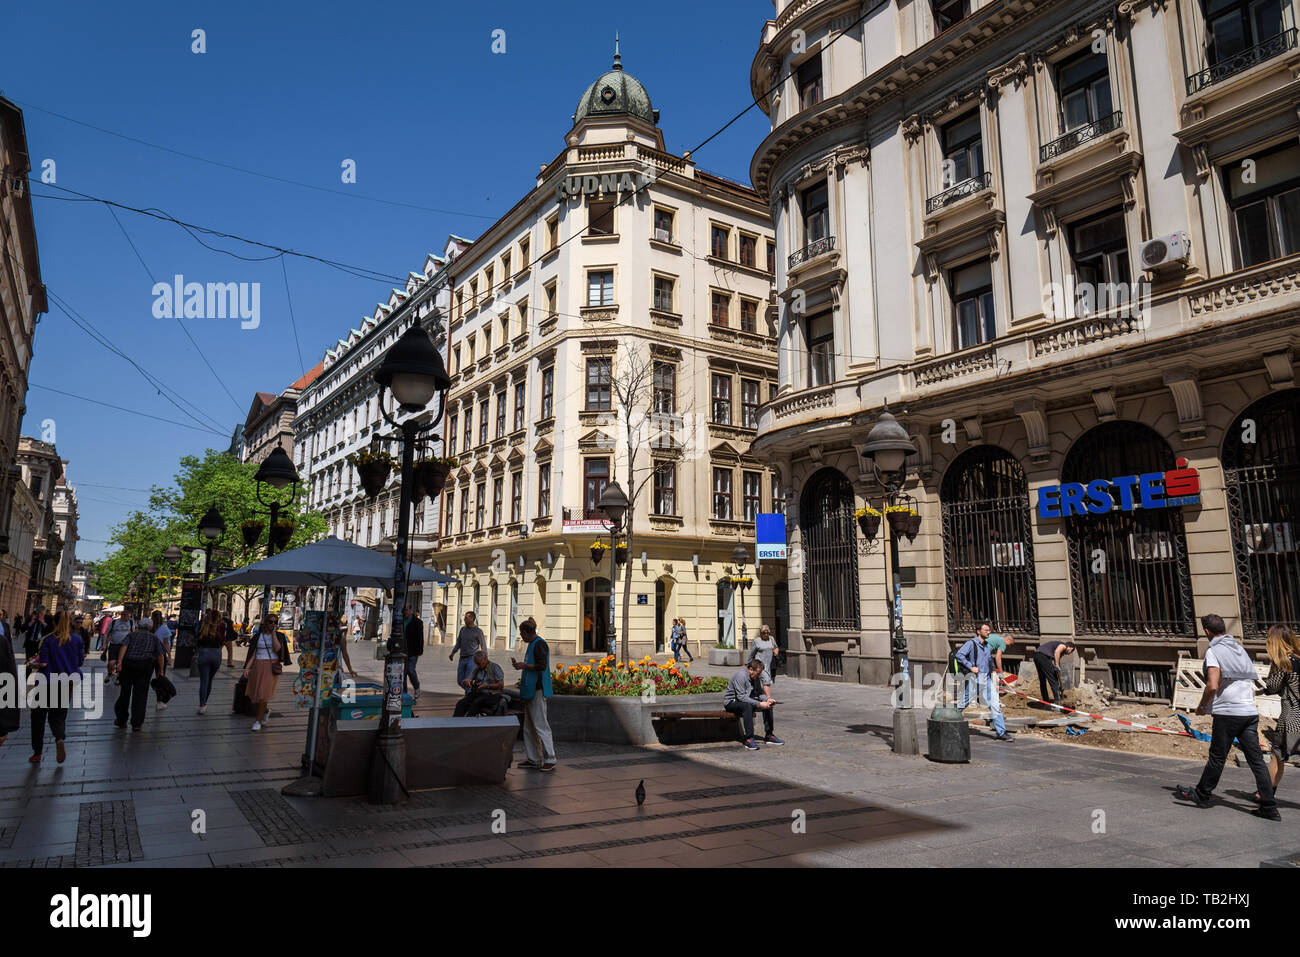 Belgrade, Serbia - April 19, 2018. People walking in Knez Mihailova street. City scene in old town with building facades, green trees and spring bloom Stock Photo